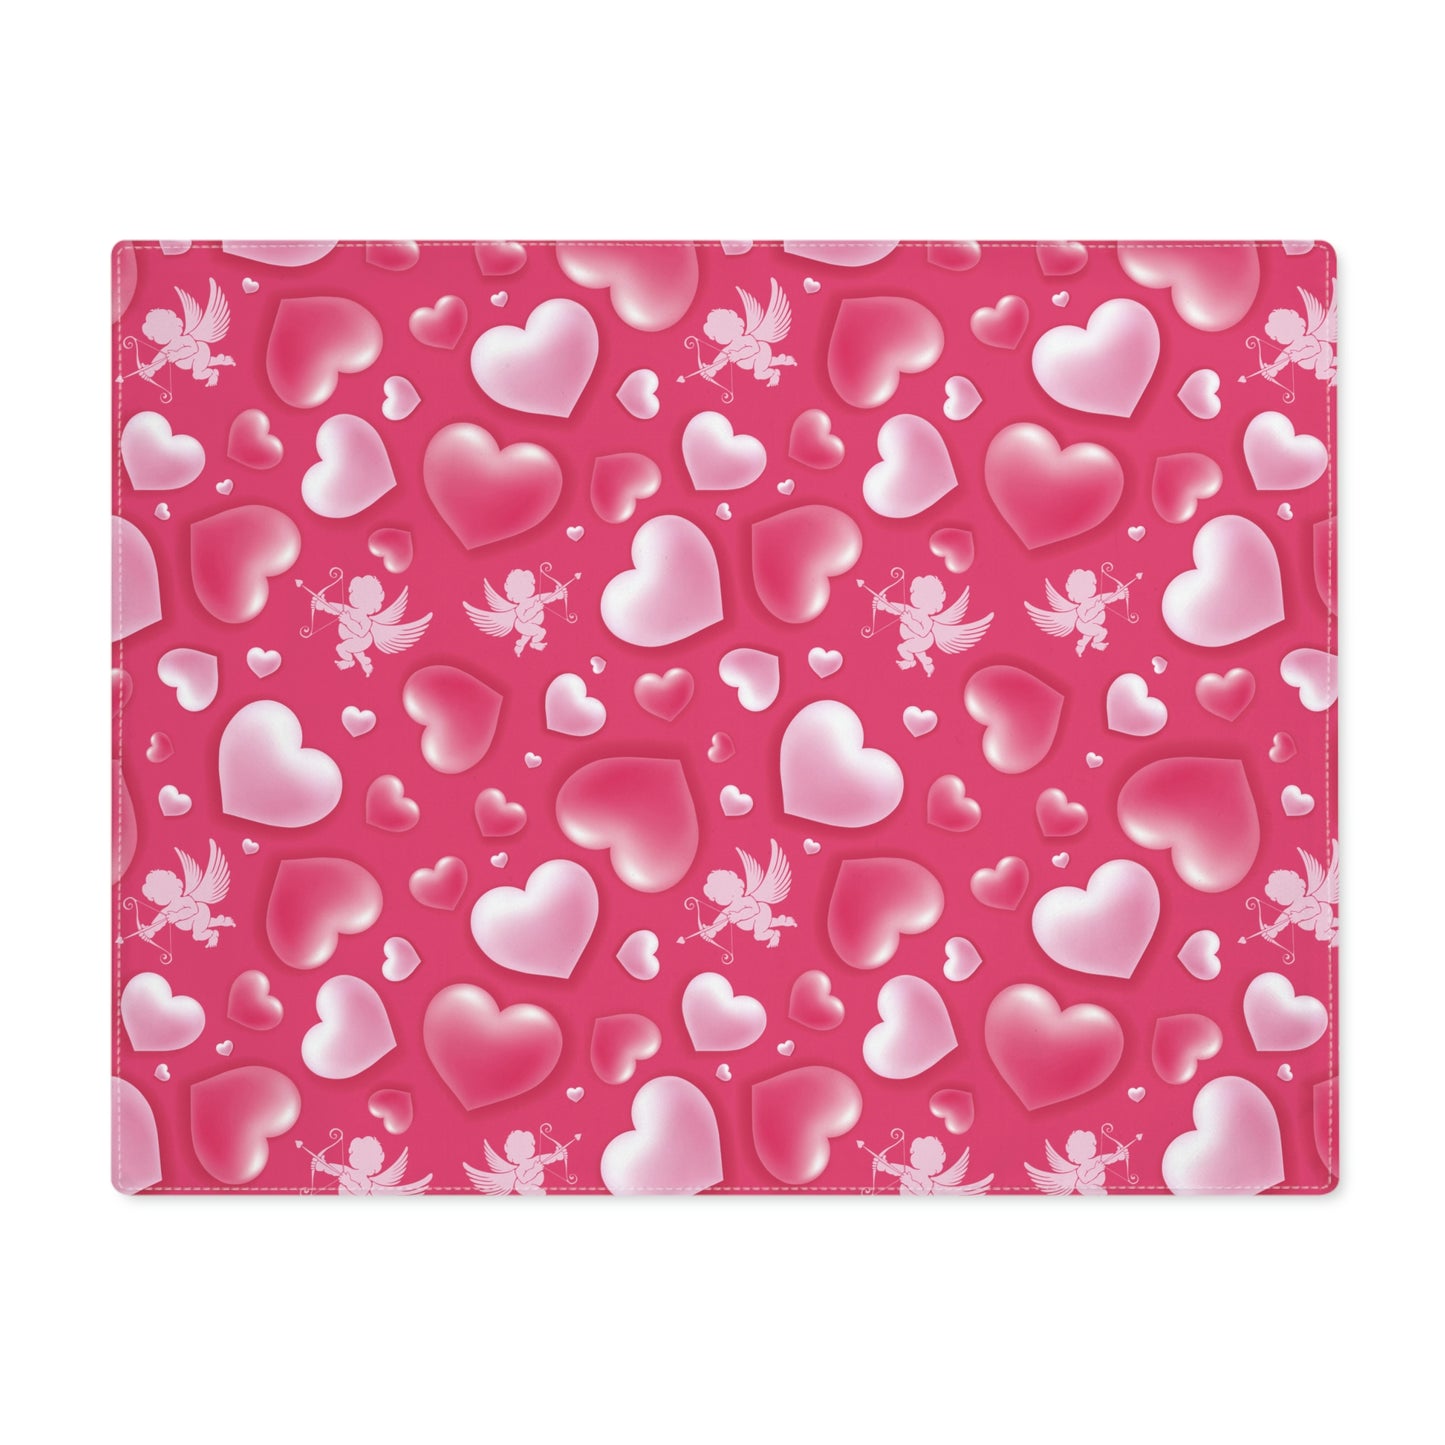 Cupid and Hearts Cotton Placemat